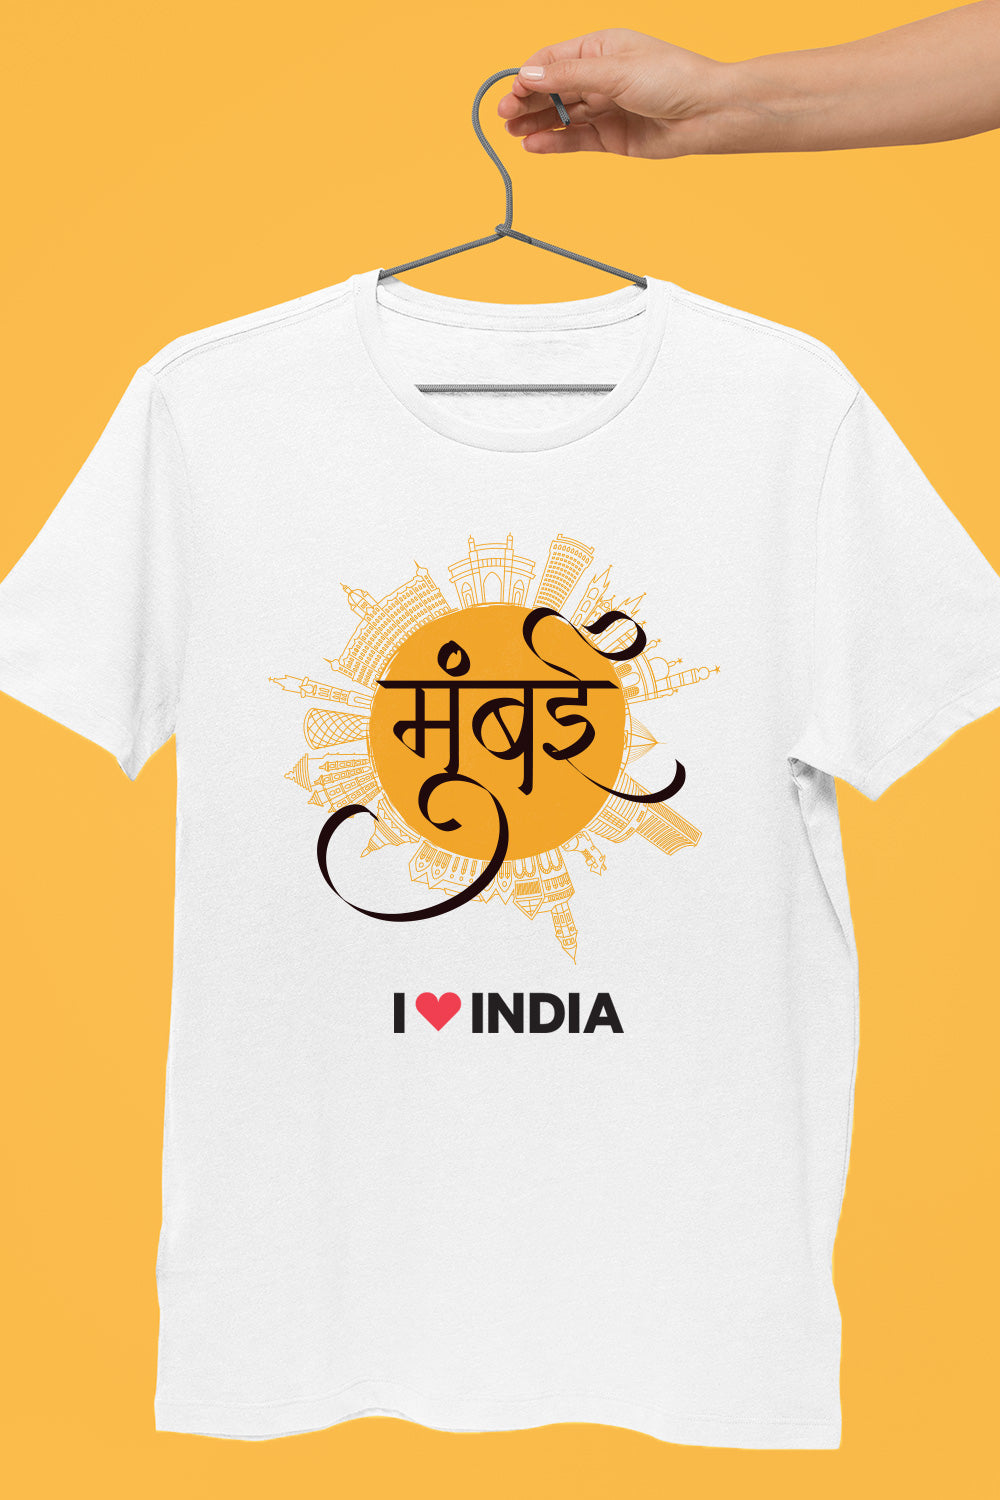 Mumbai - Styched in India Graphic T-Shirt White Color